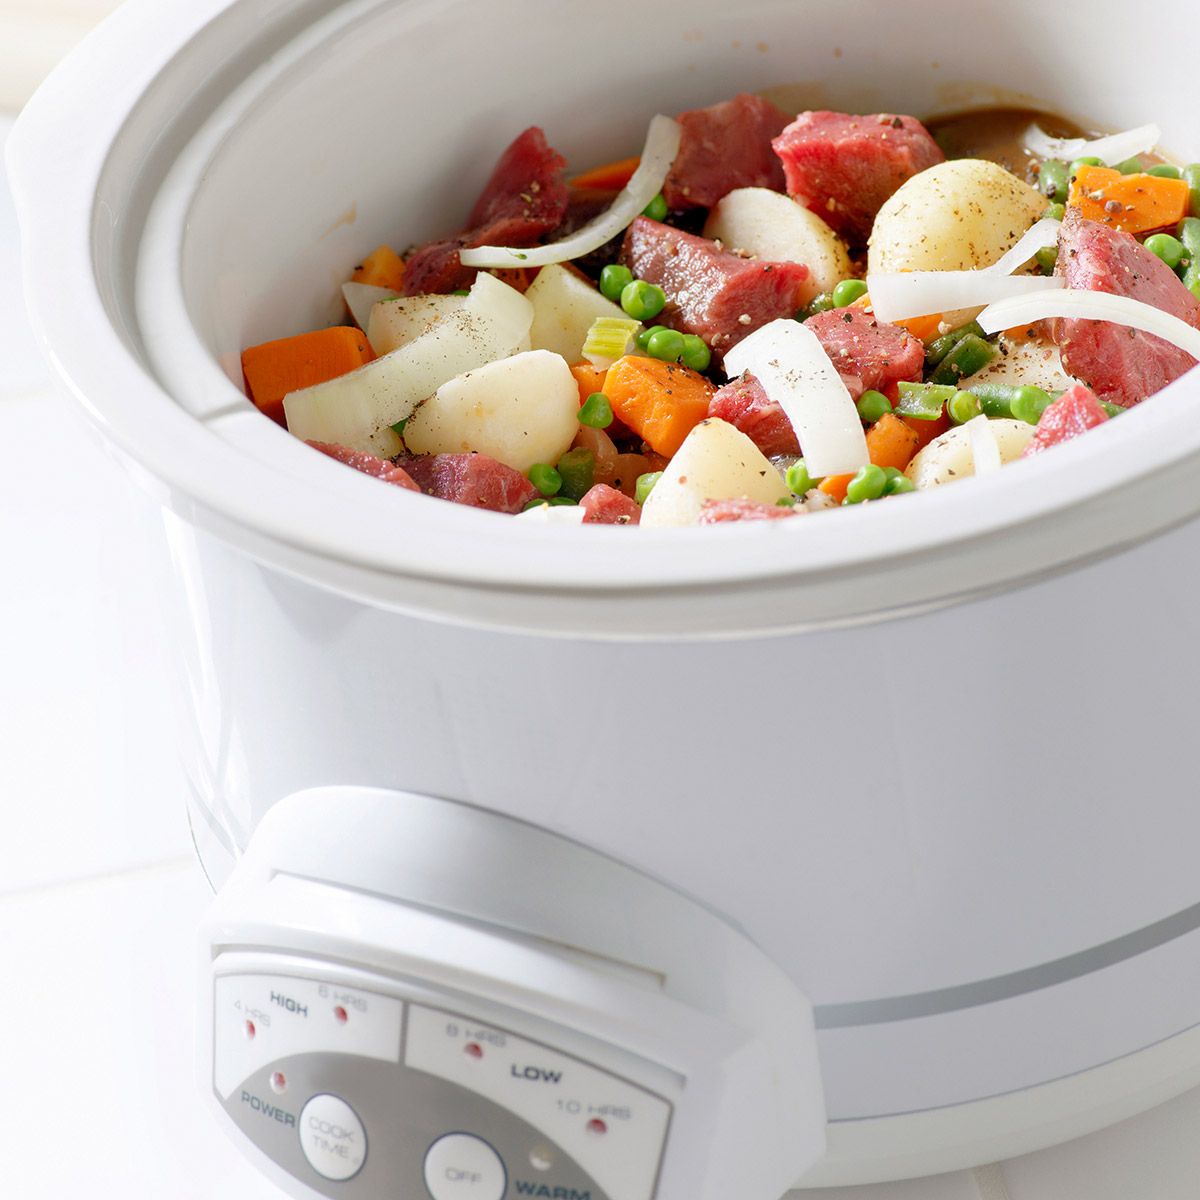 Slow cooker, pressure cooker and steam cooker buying guide - how to buy a  slow cooker, pressure cooker and steam cooker